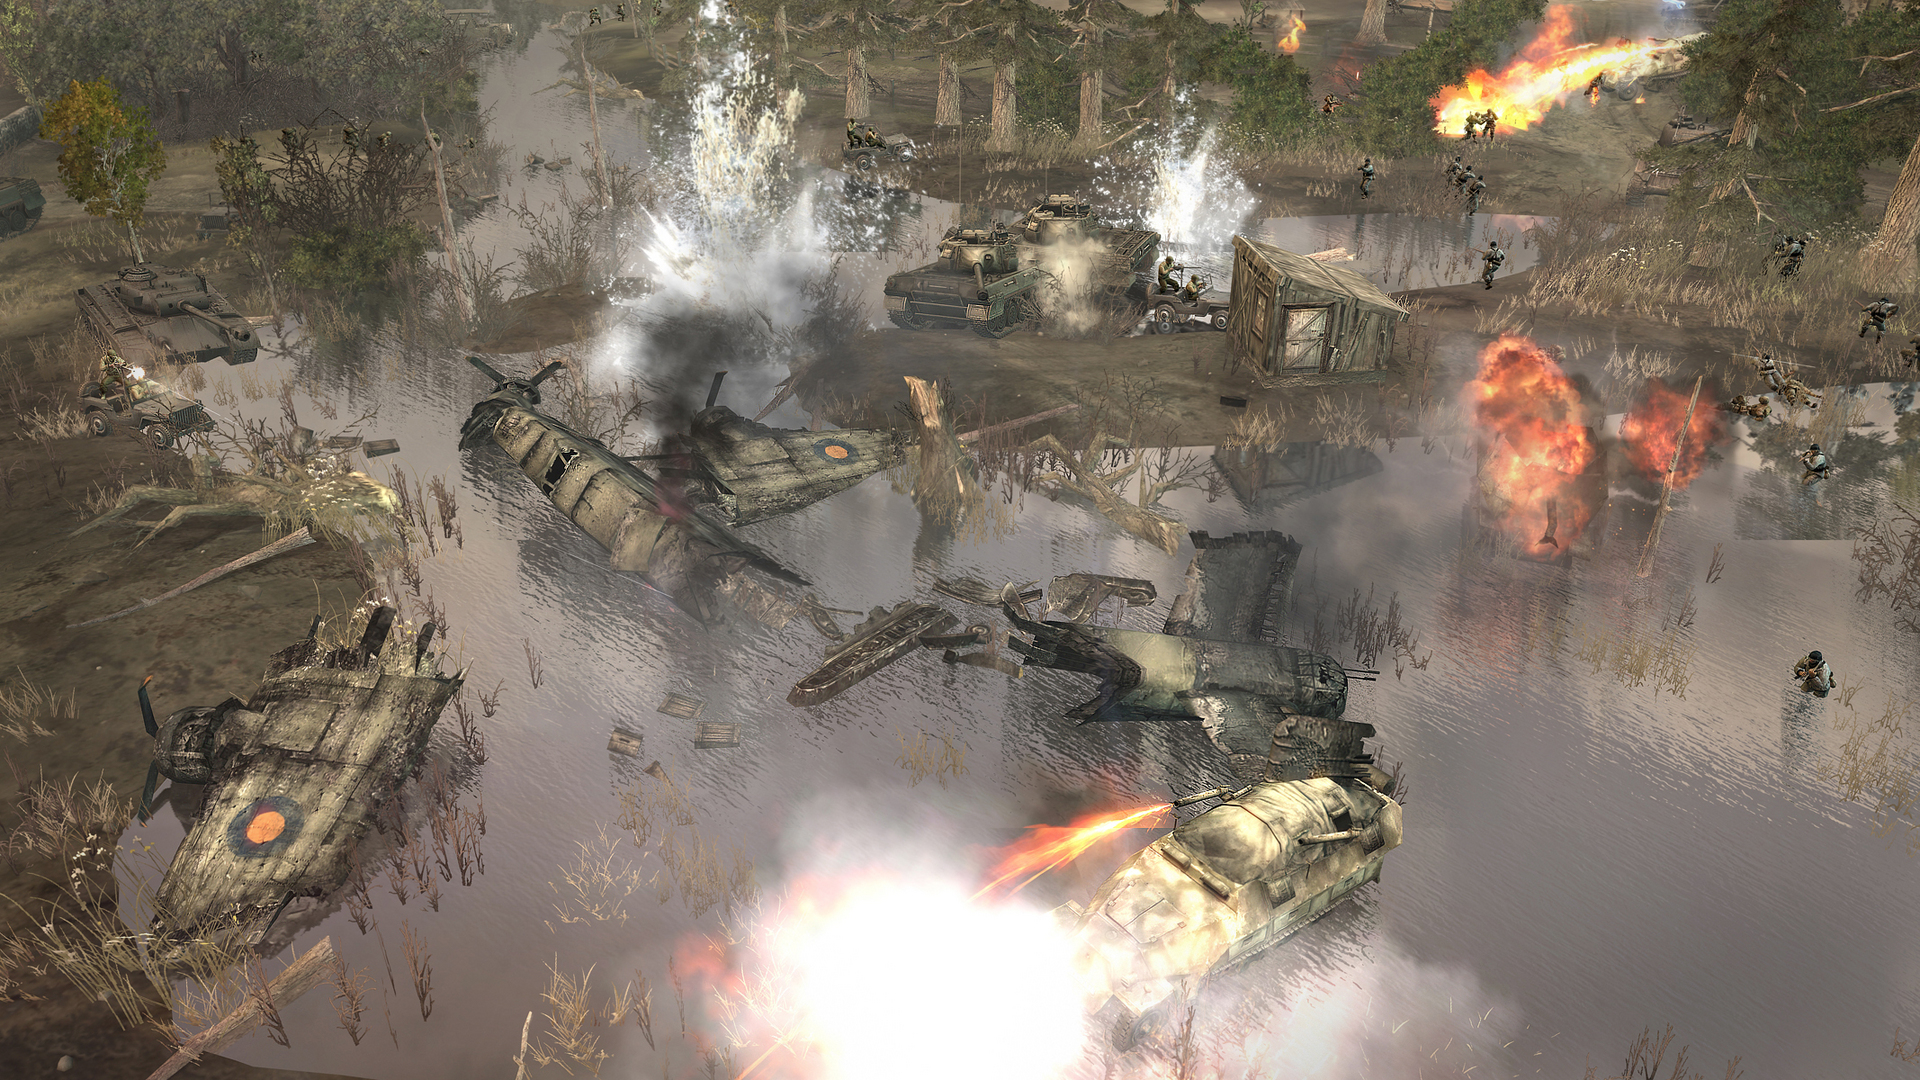 Company of heroes tales of valor multiplayer crack games